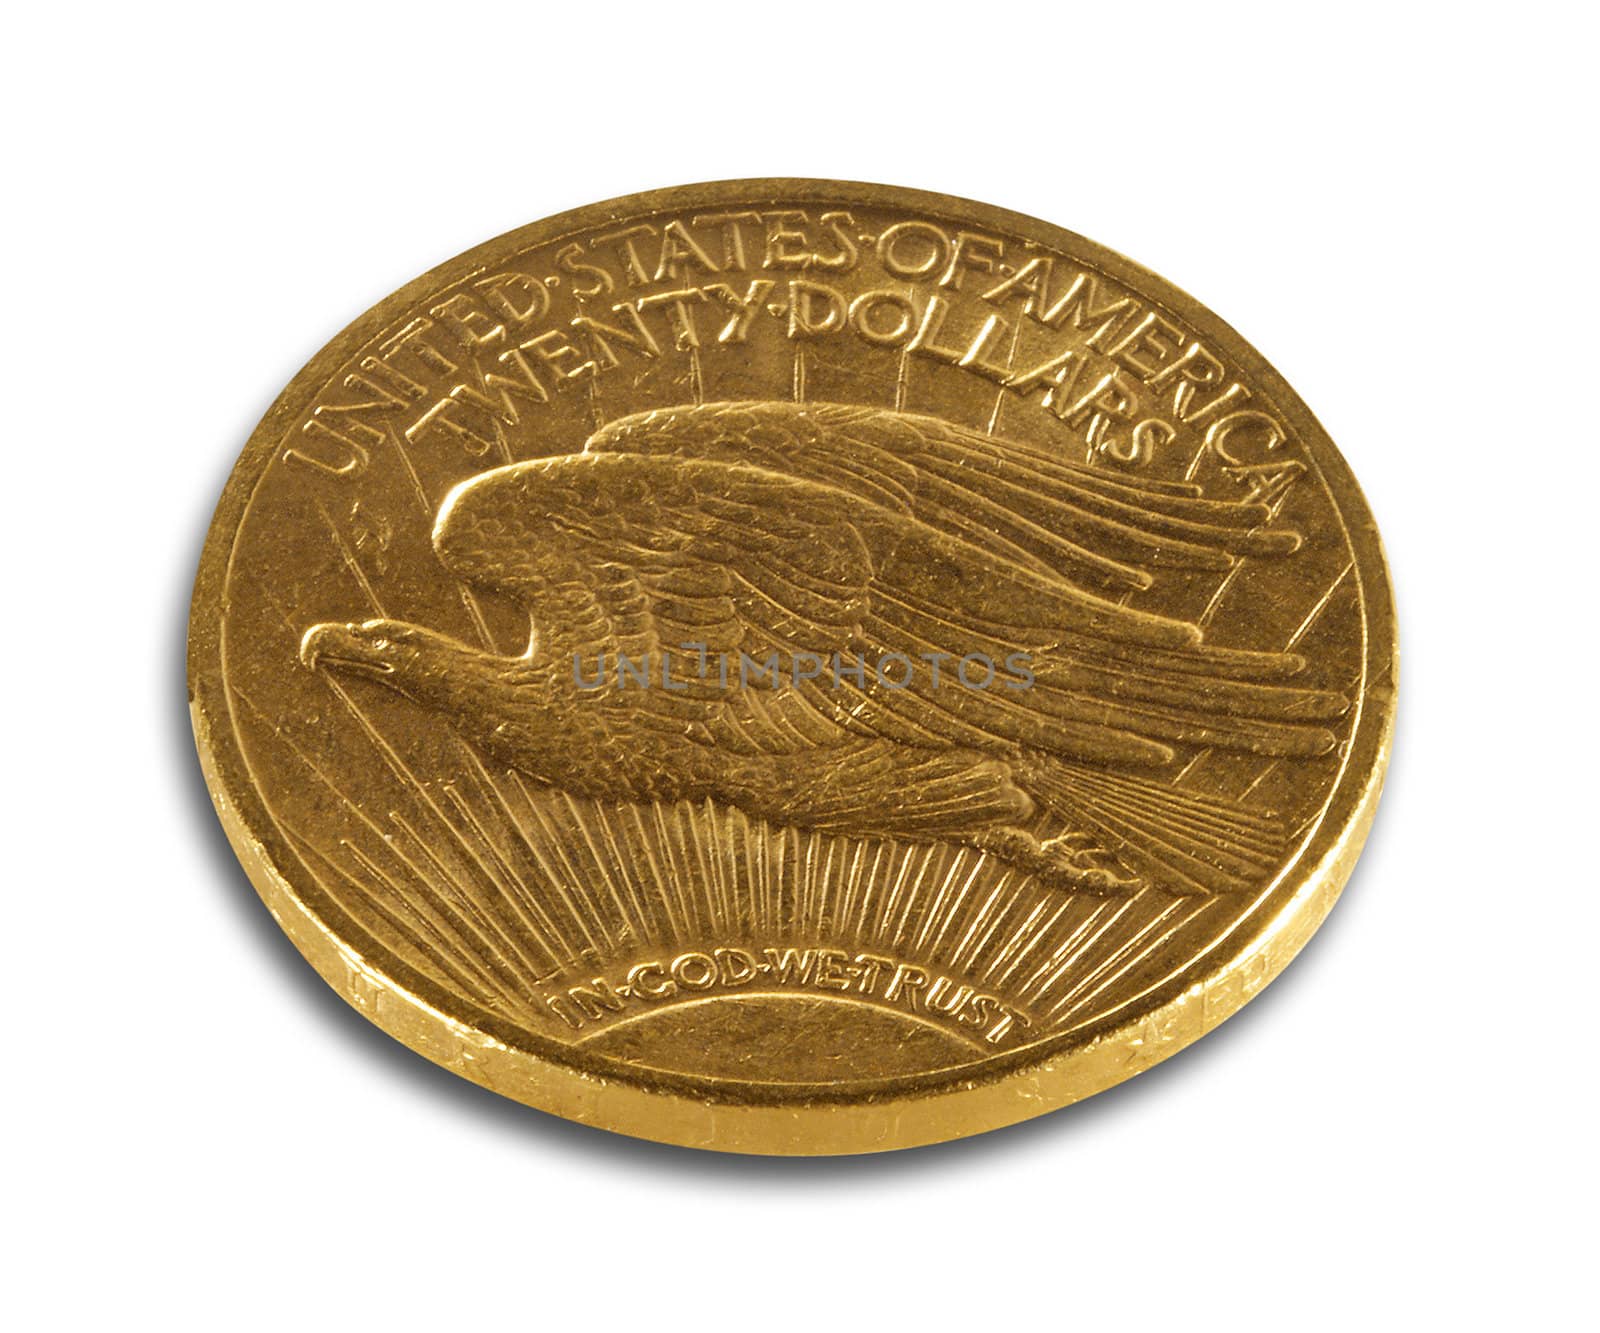 Double eagle gold coin on white, isolated with clipping path